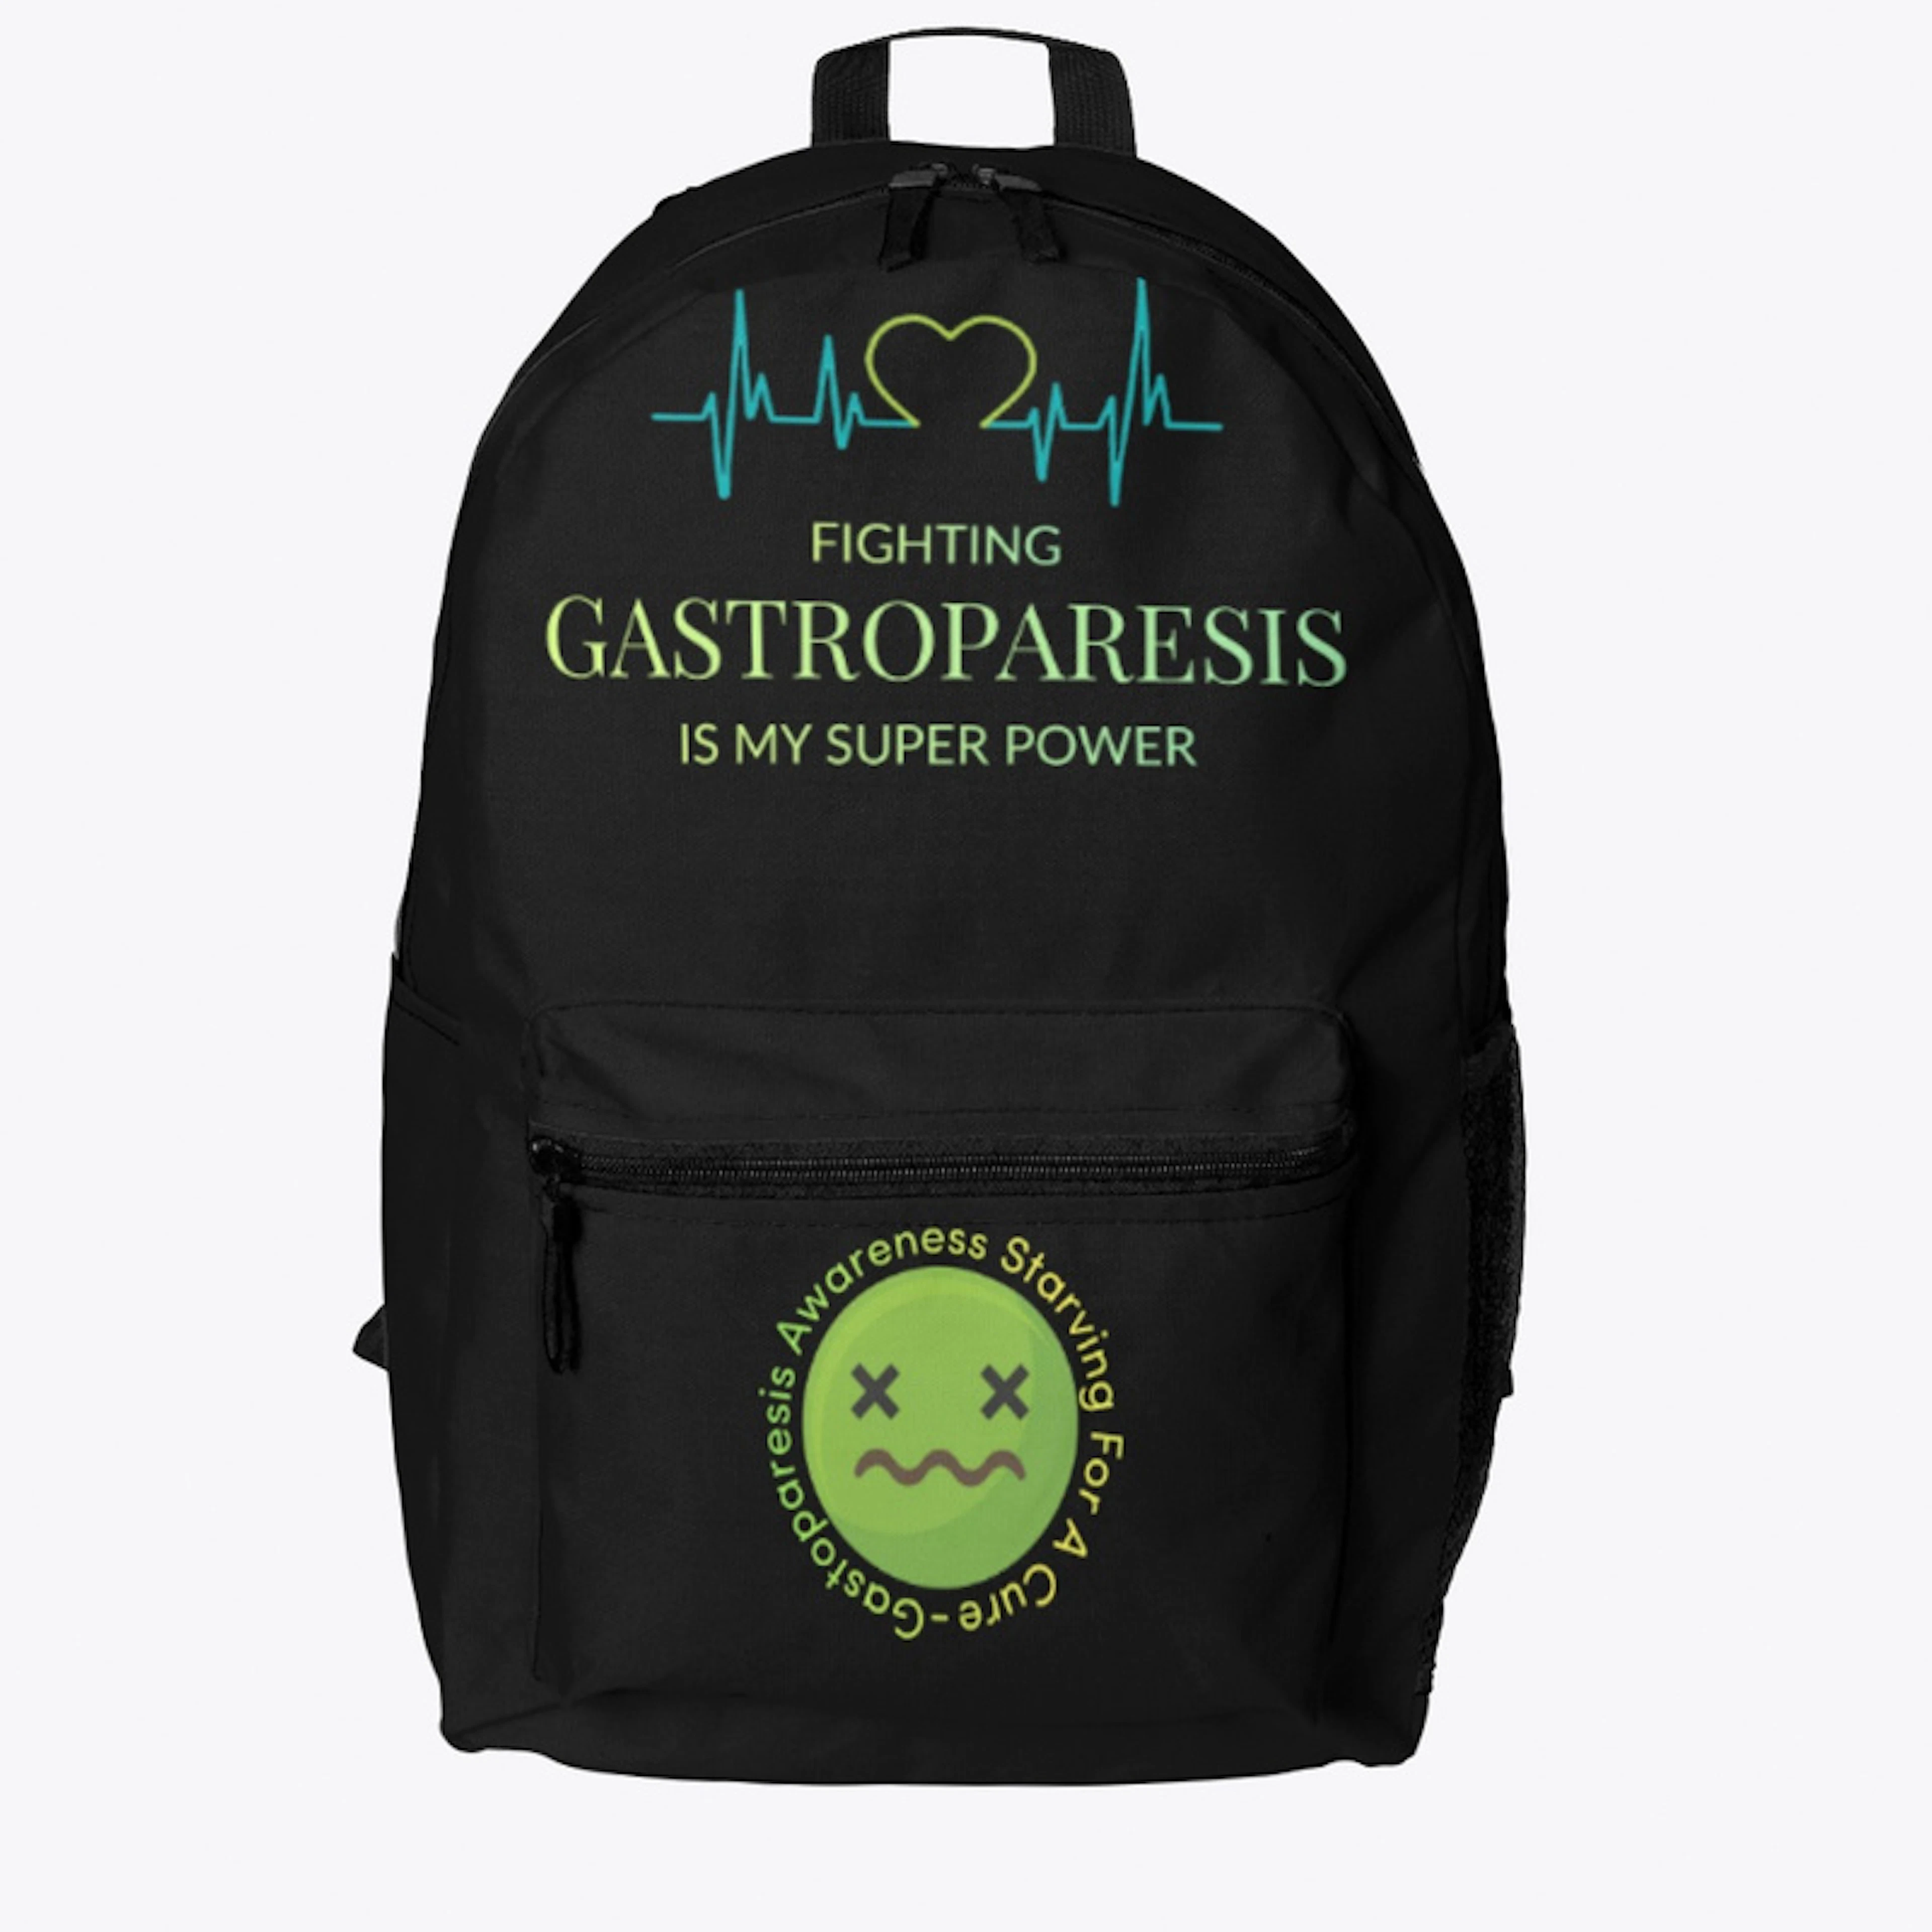 Fighting Gastroparesis is my Super Power